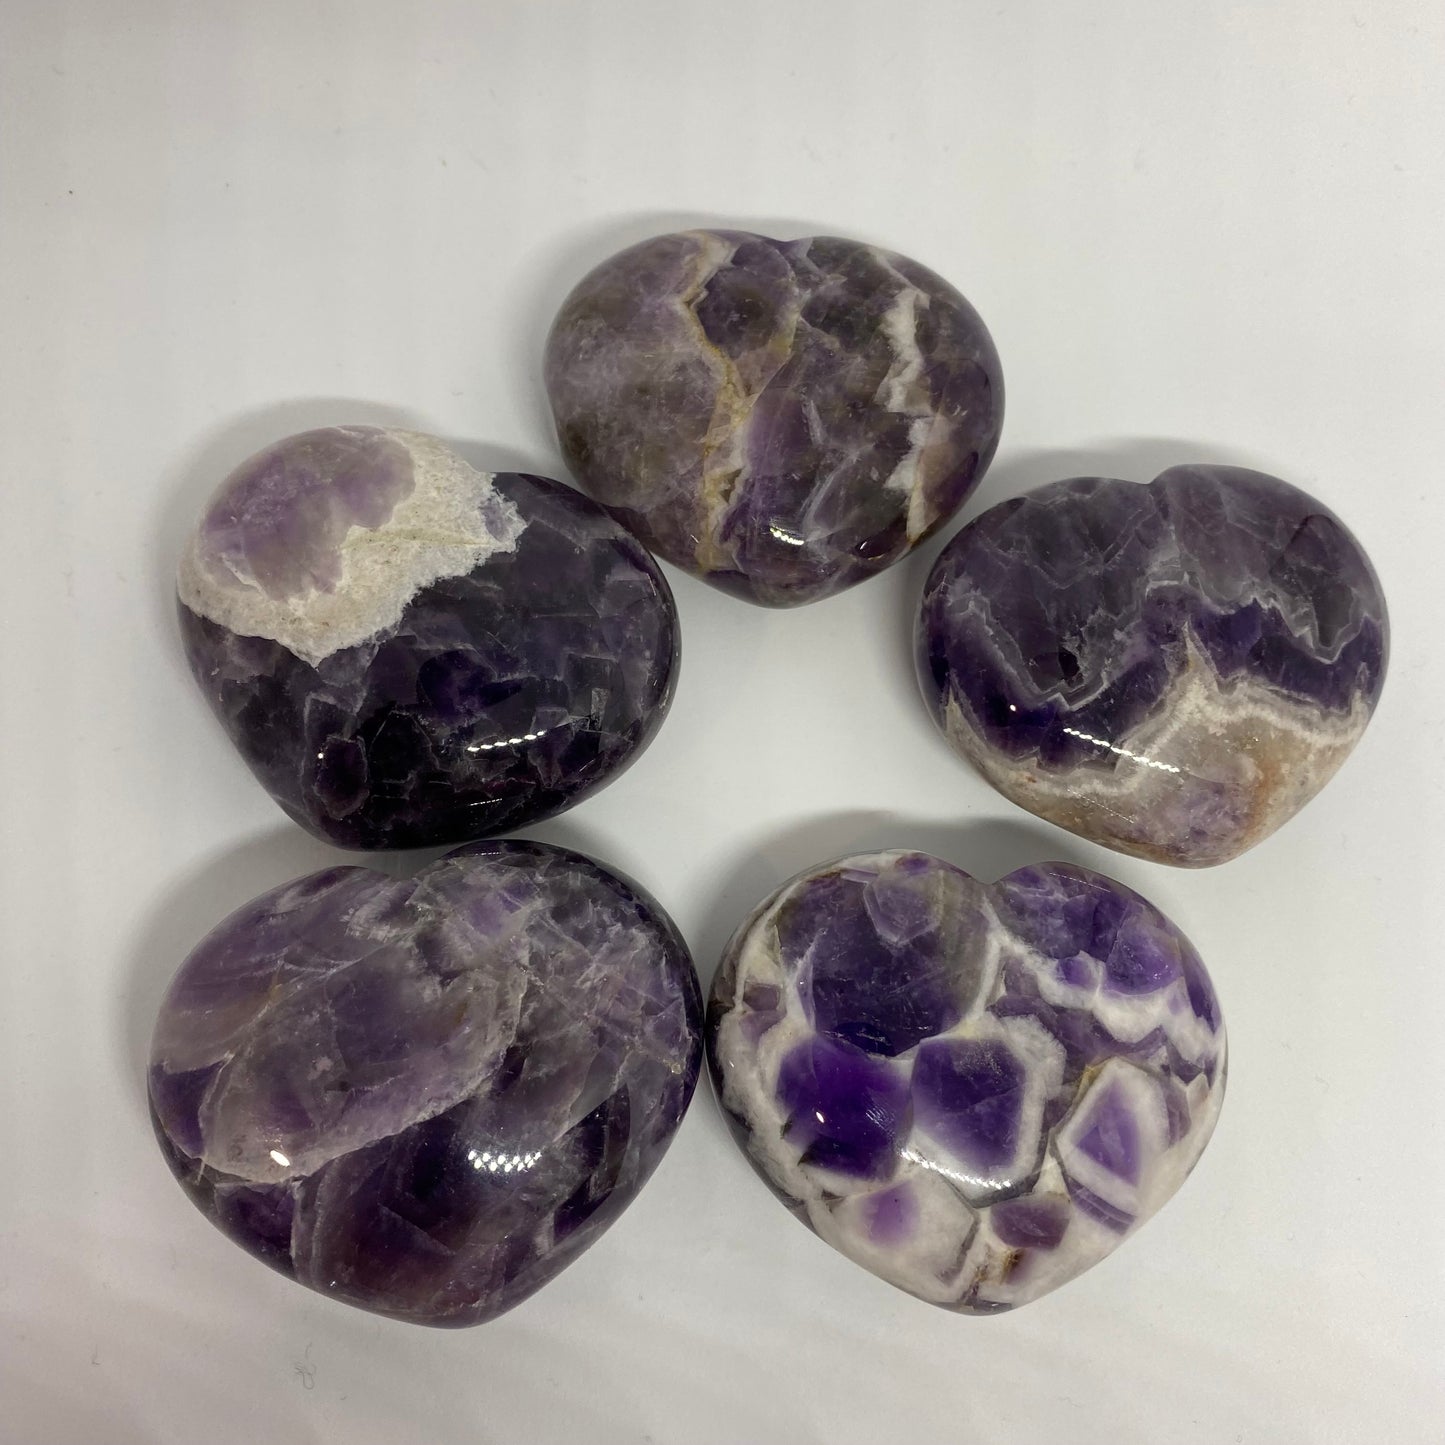 Amethyst heart-shaped healing crystal & gemstone collections